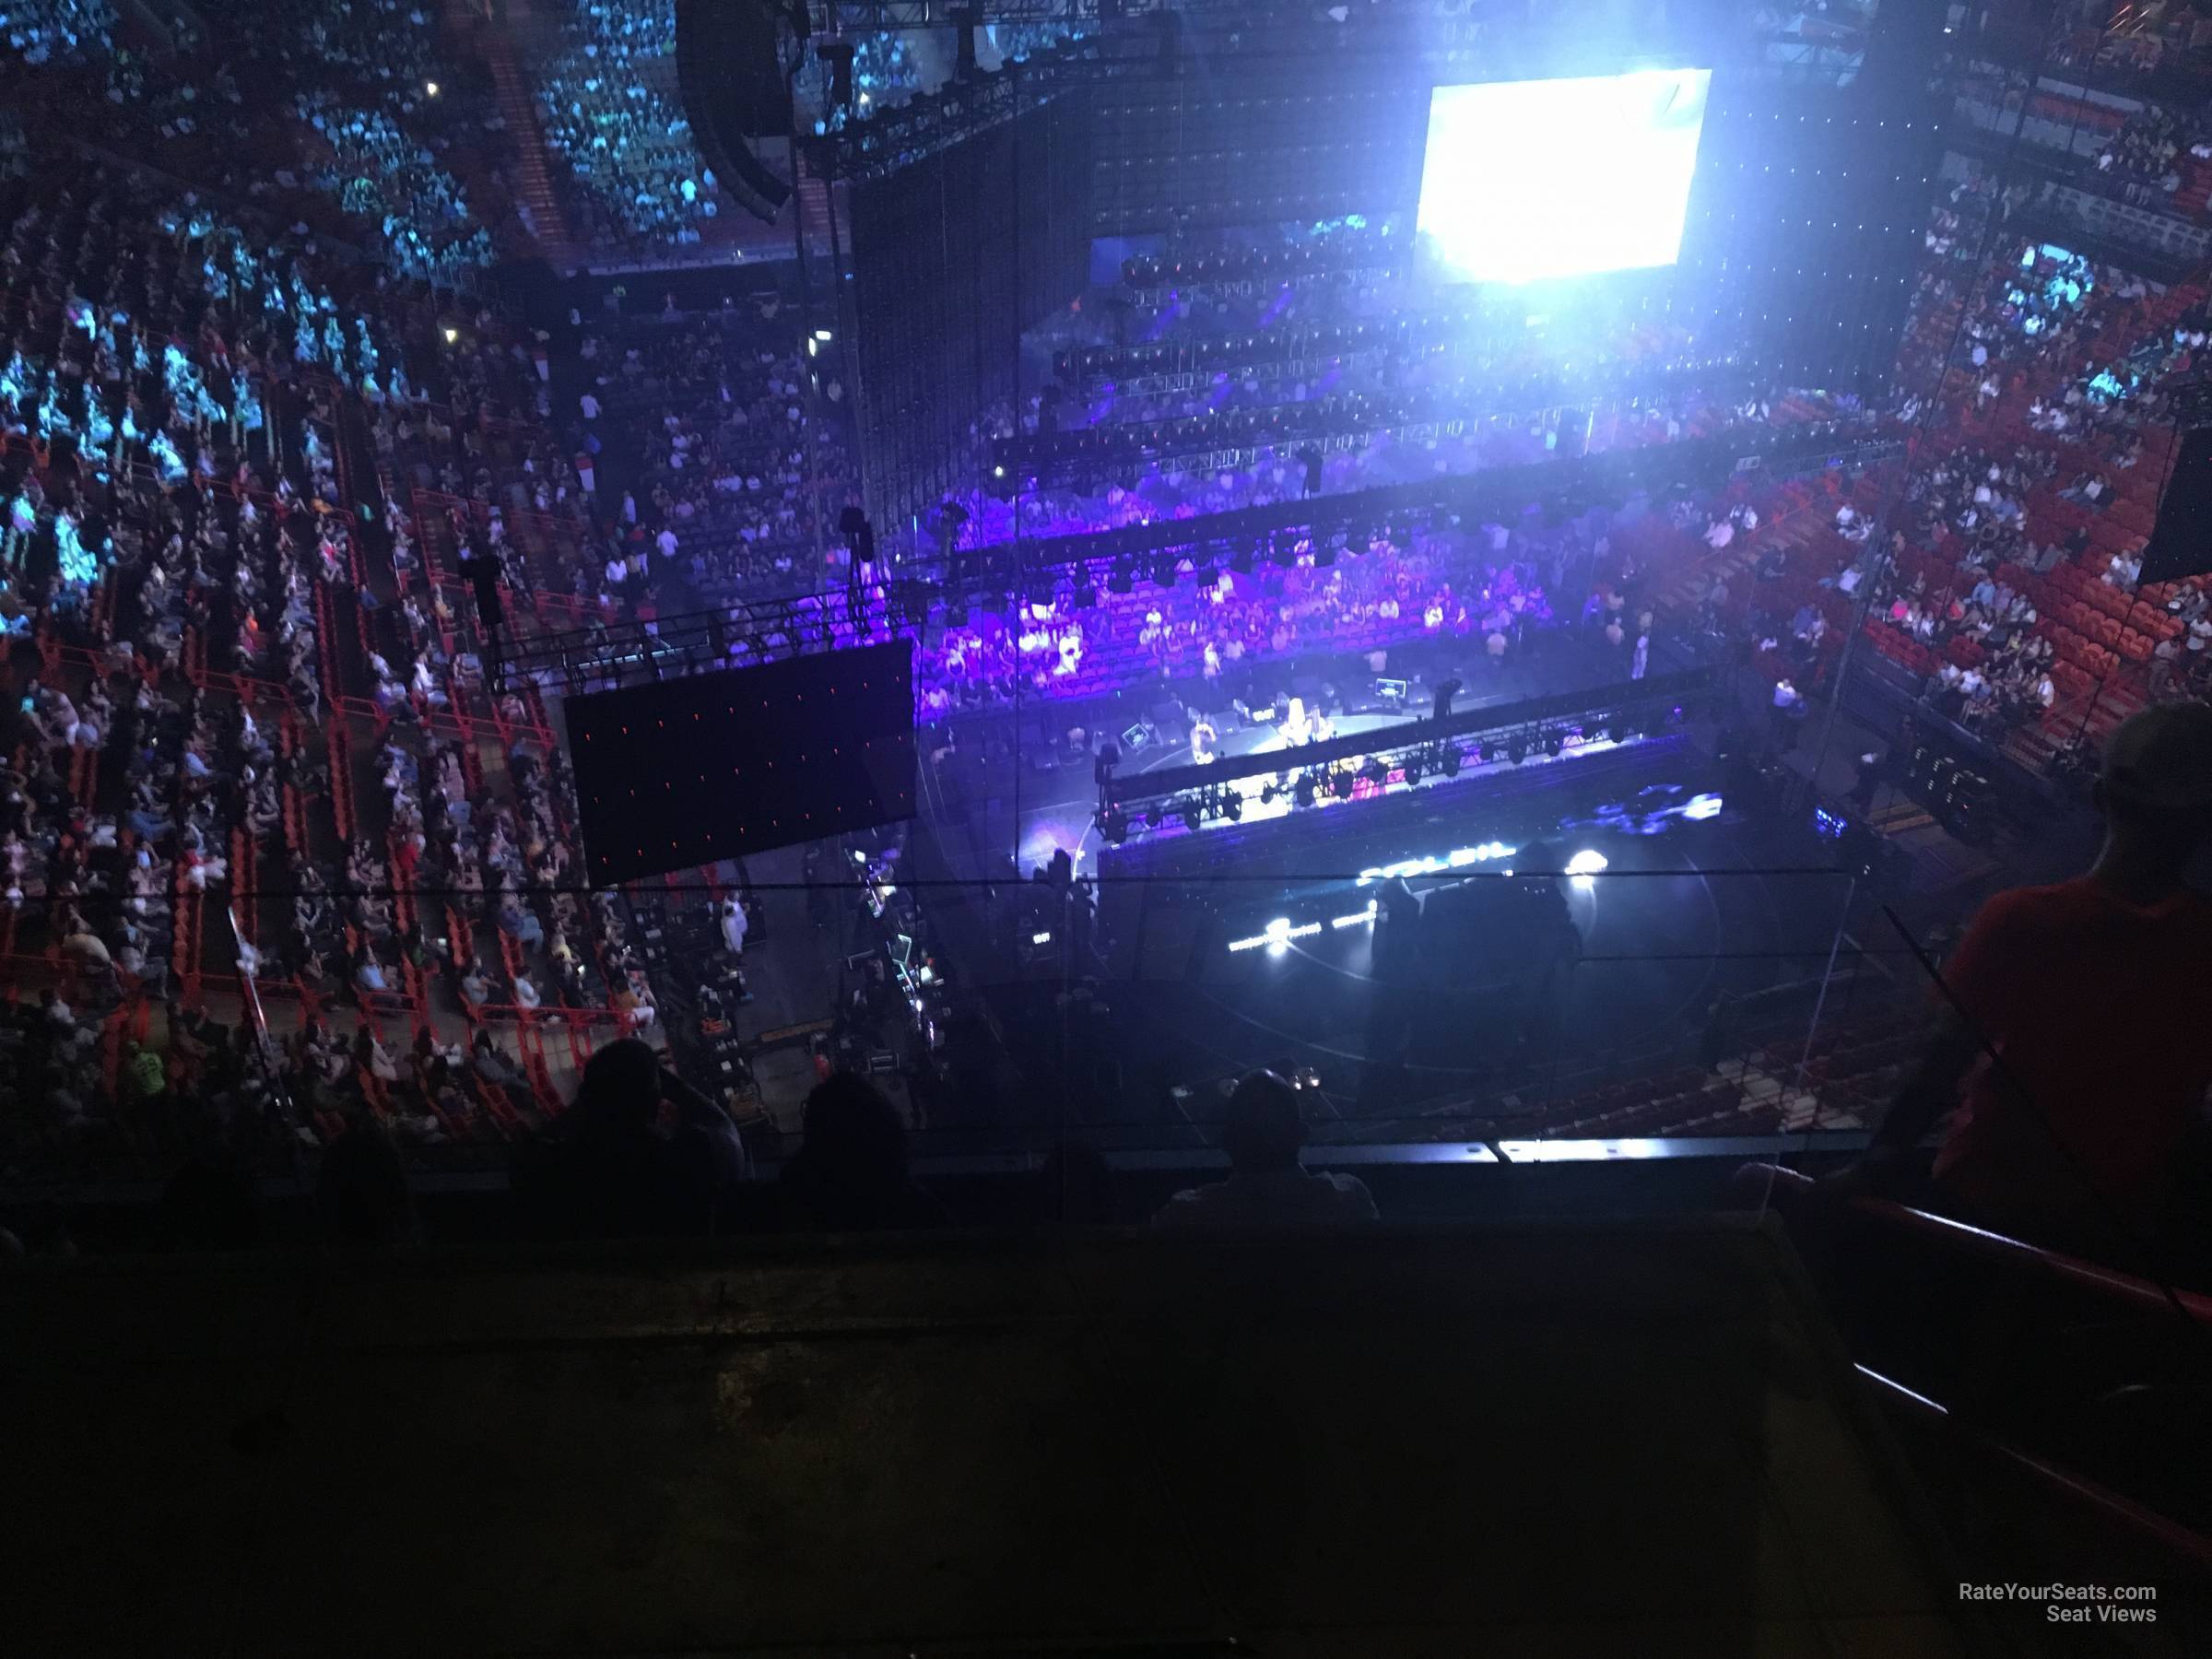 section 407, row 4 seat view  for concert - kaseya center